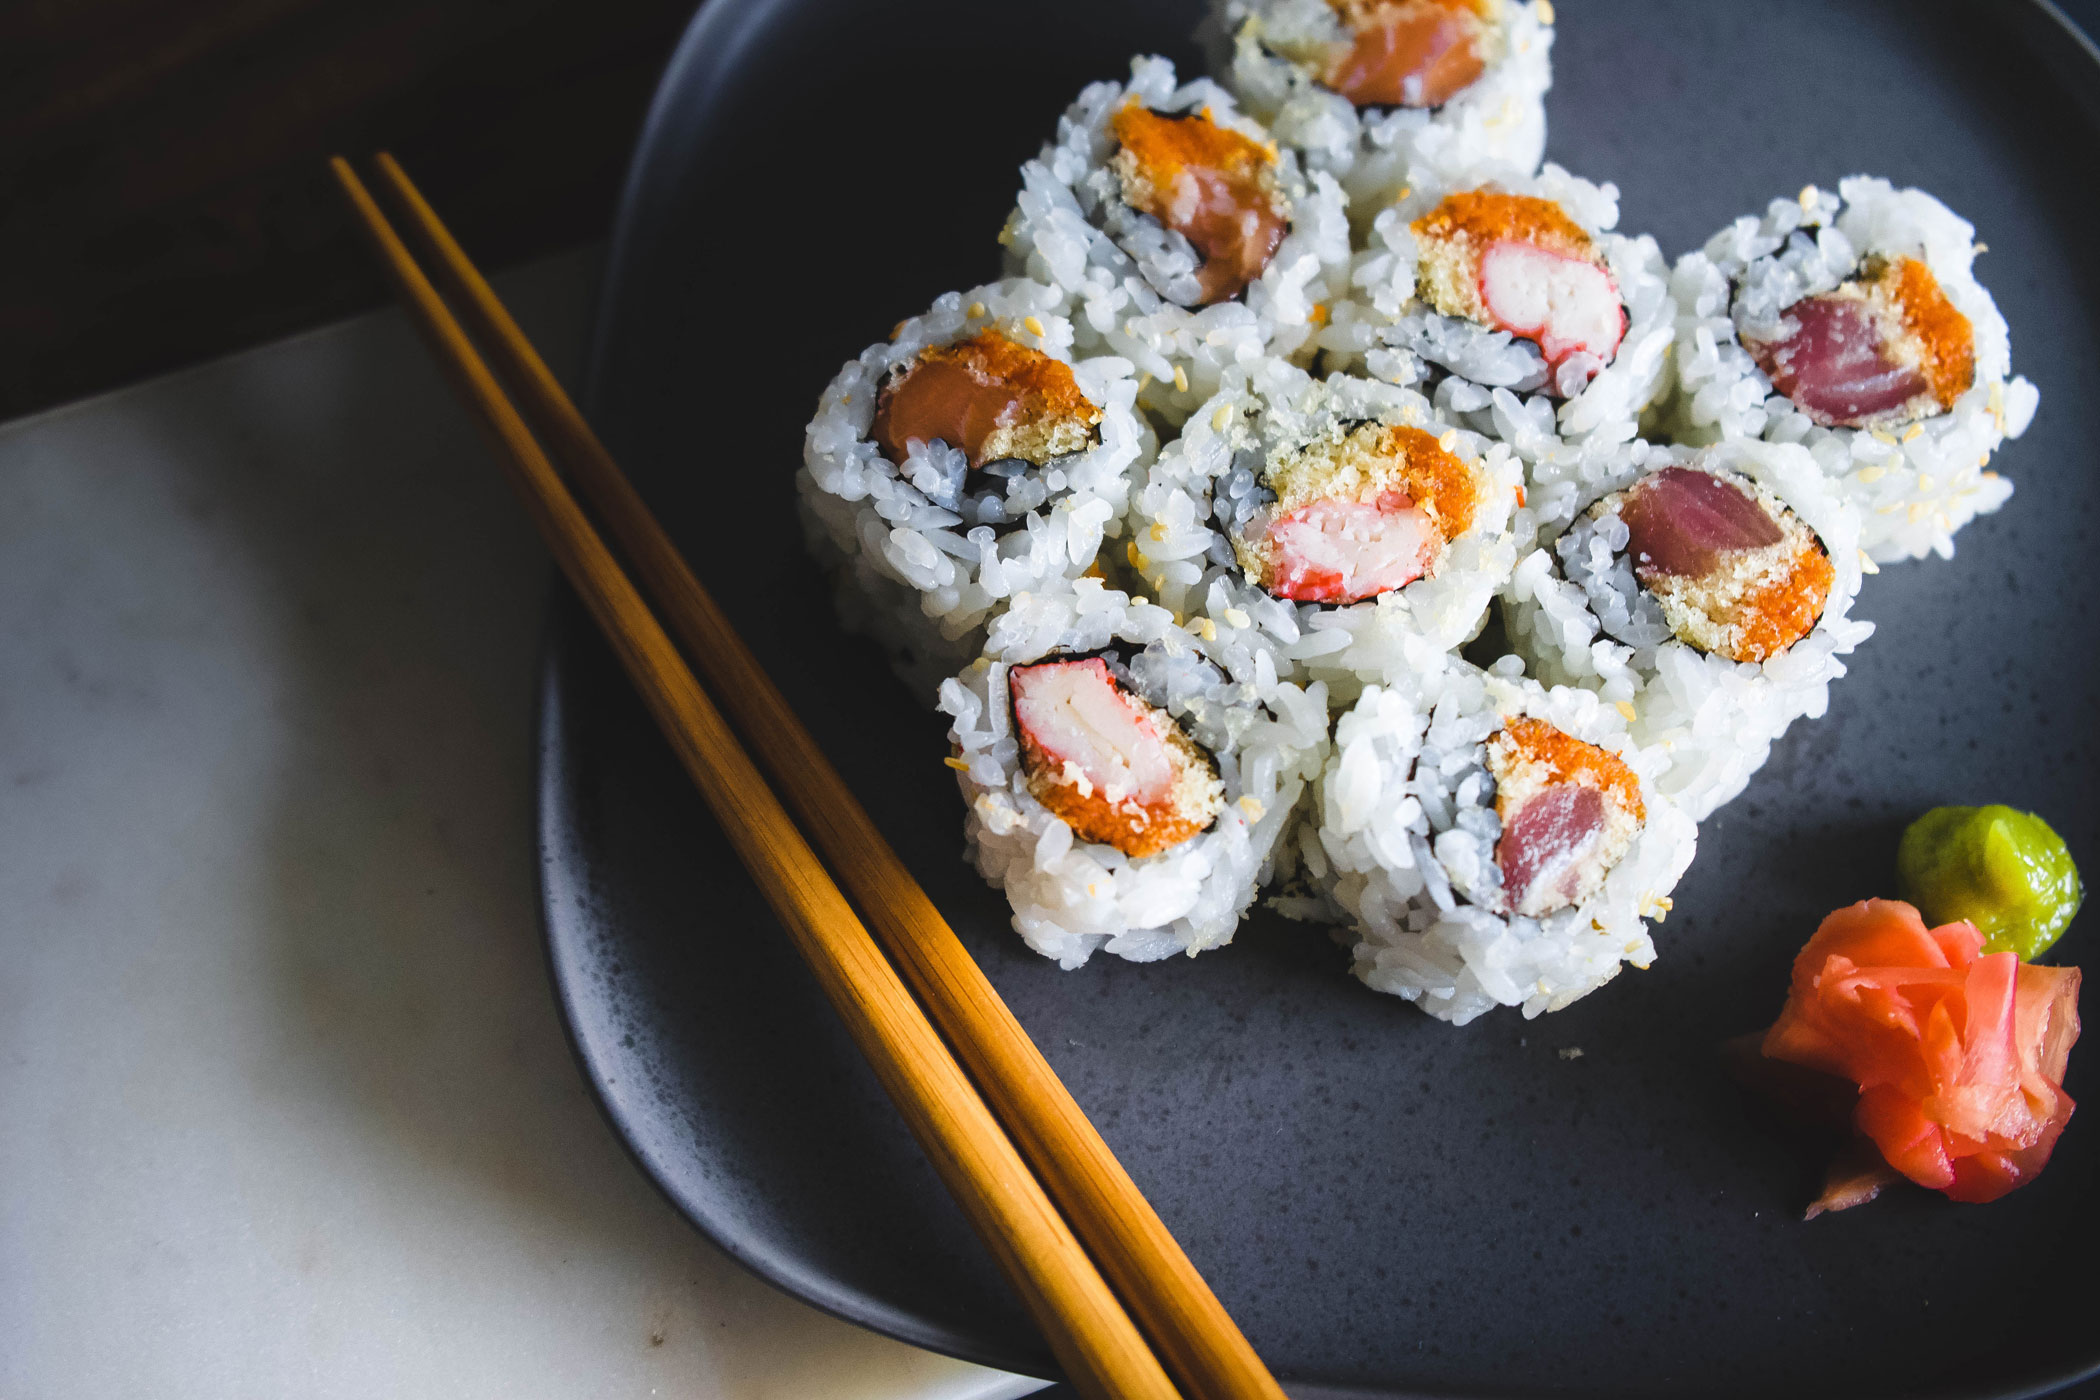 who invented the sushi roll?